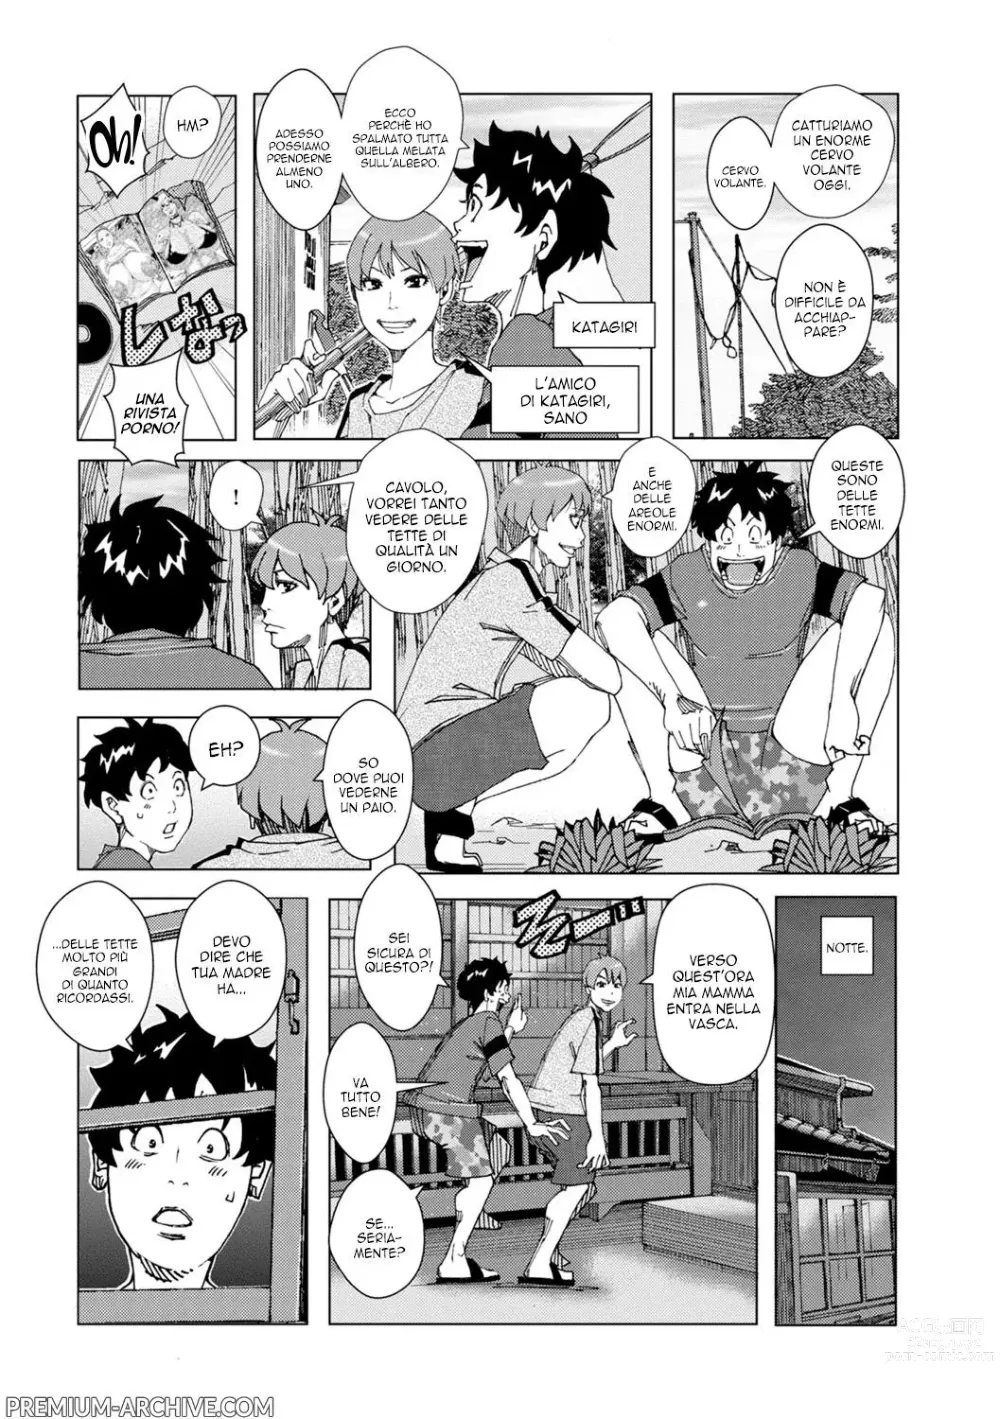 Page 2 of manga Memorie Sessuali Private